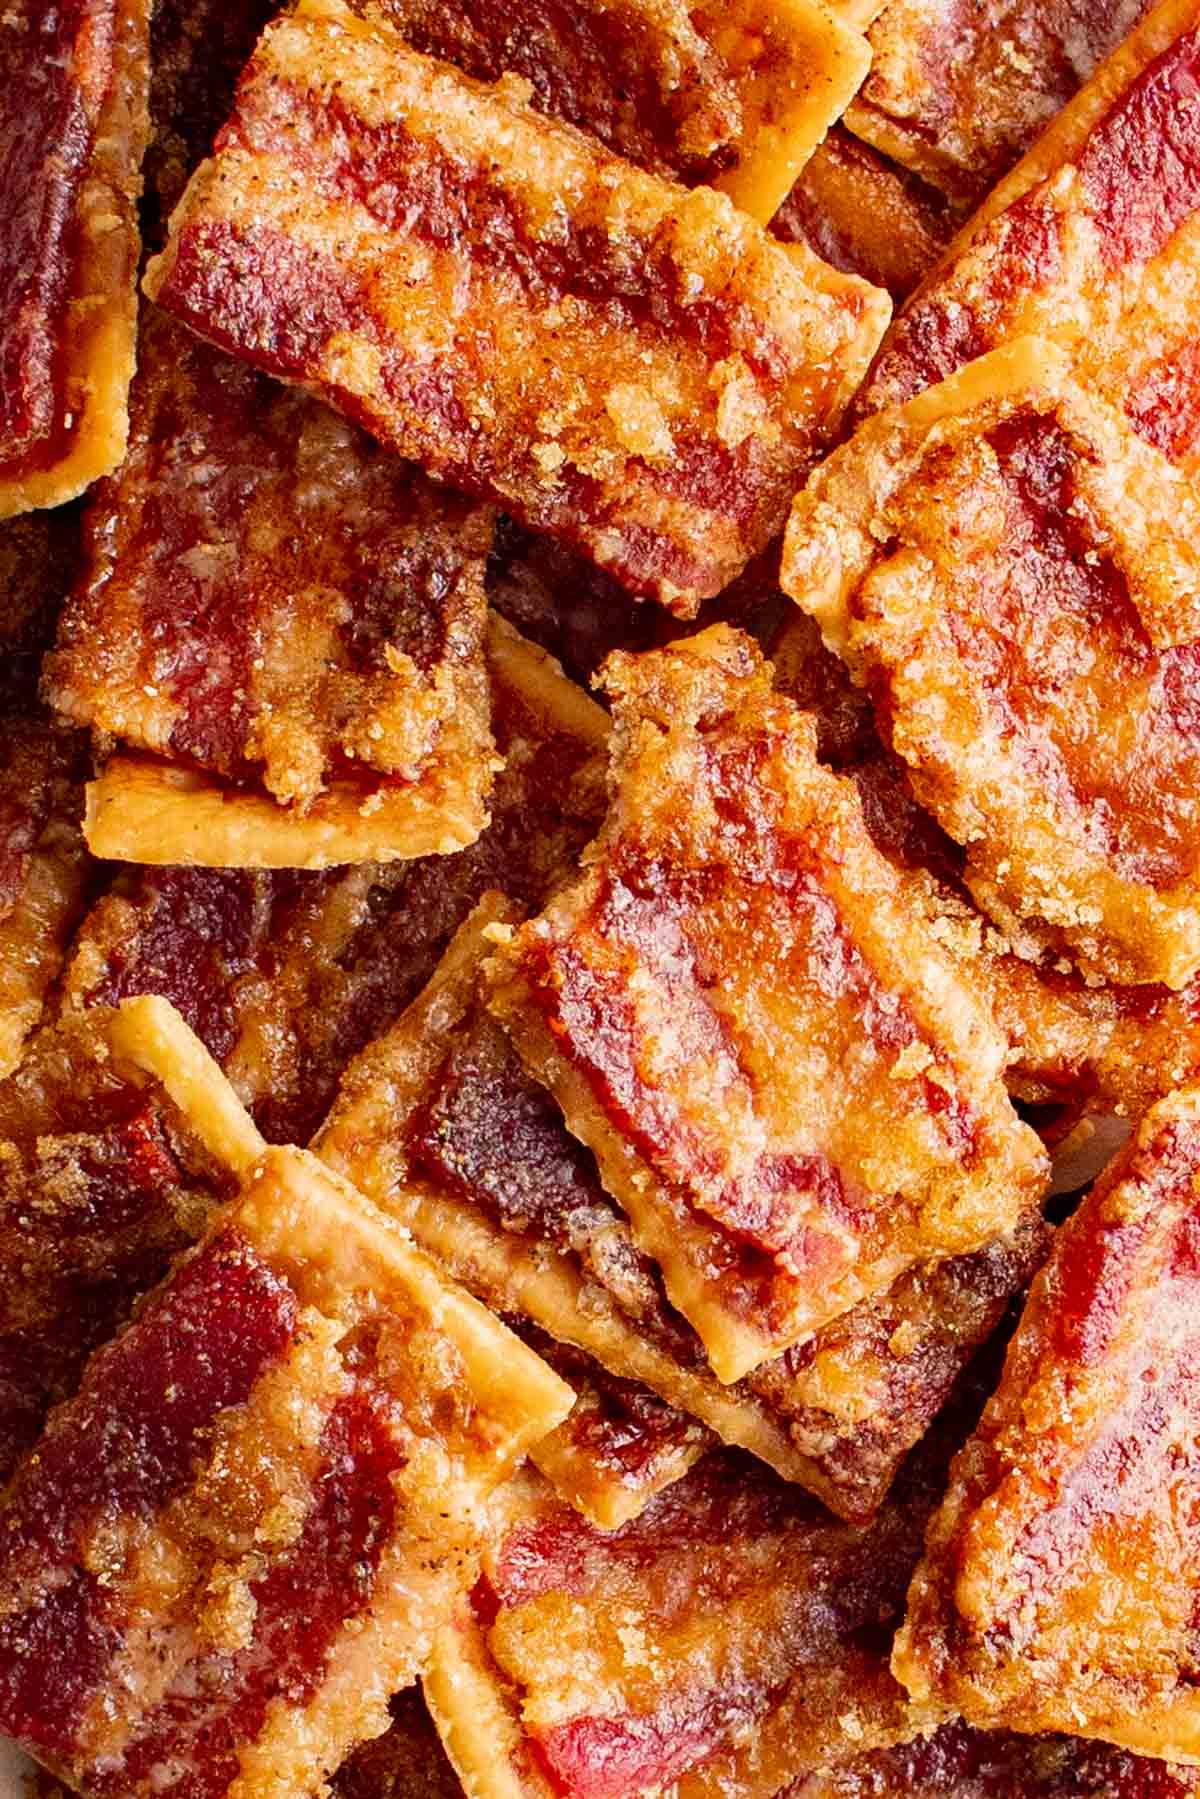 Candies bacon crackers in a large pile.